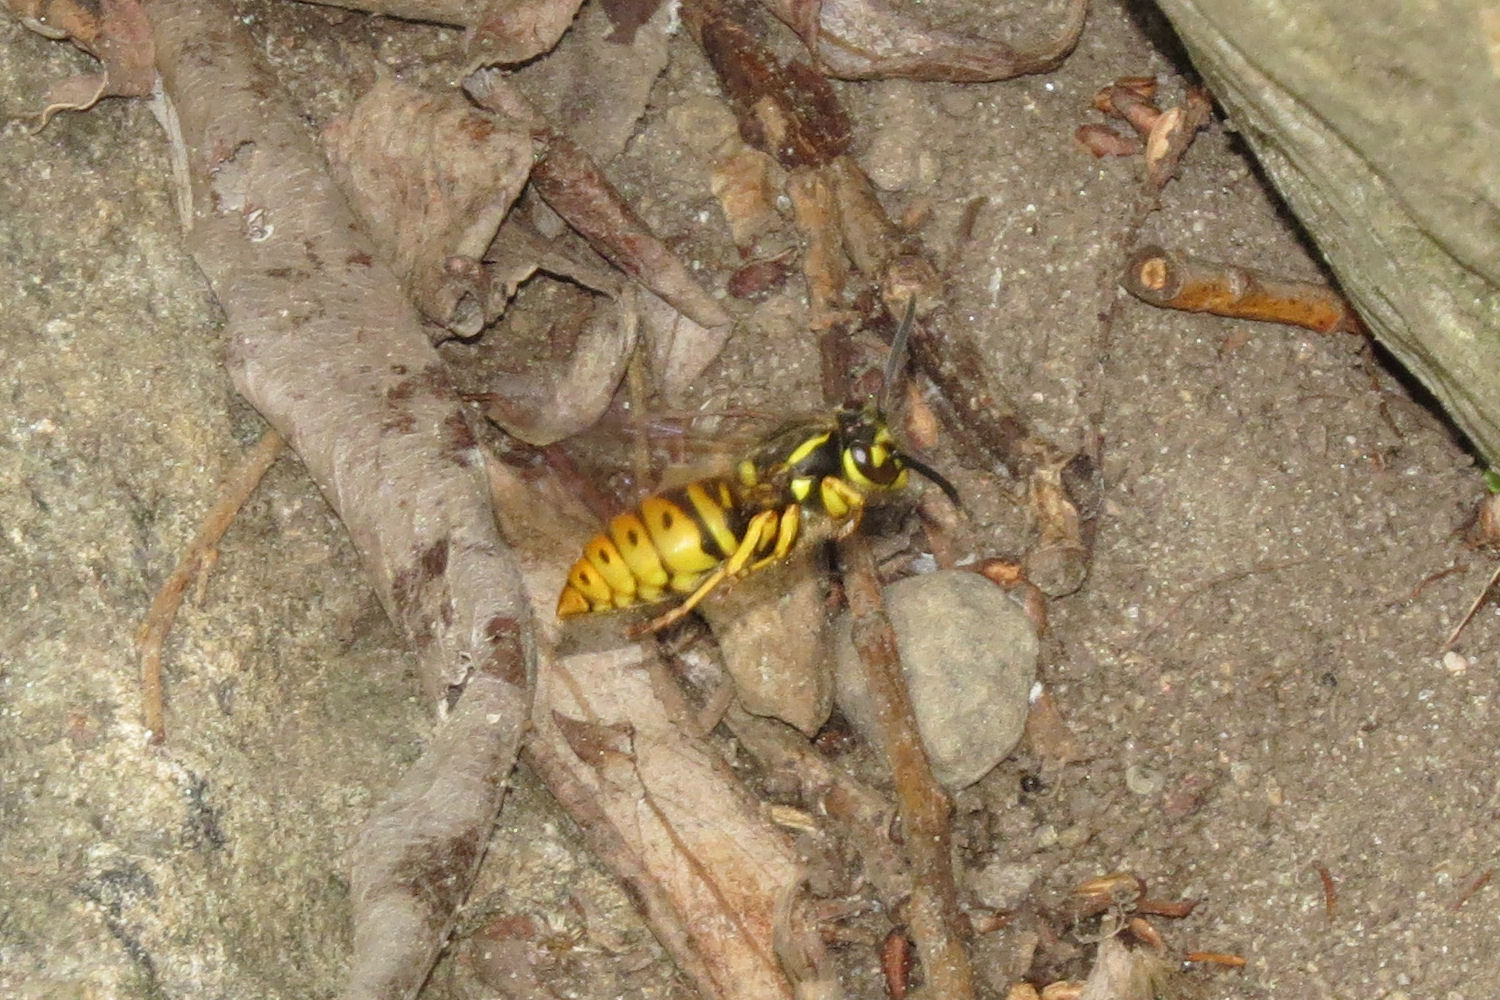 Southern Yellowjacket Queen emerges from hibernation - What's That Bug?